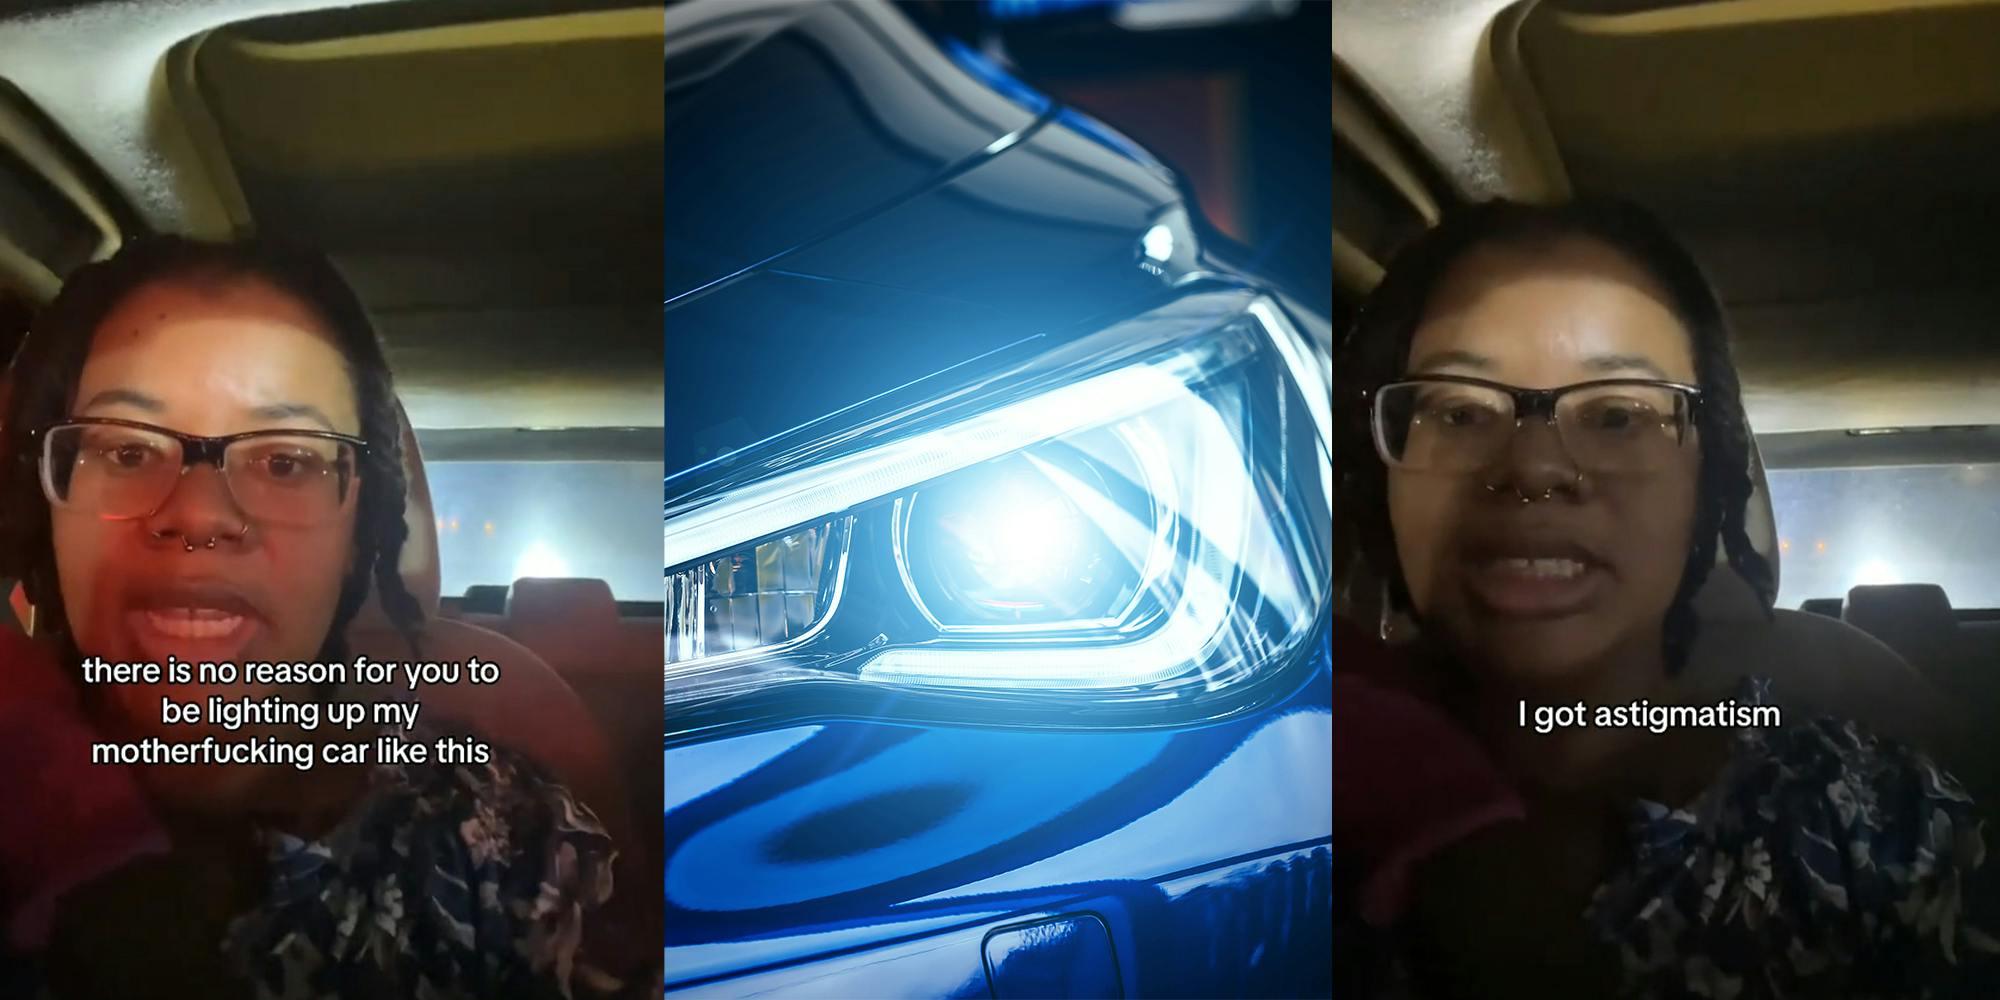 Woman claims that extremely bright headlights are making it difficult for her to drive at night